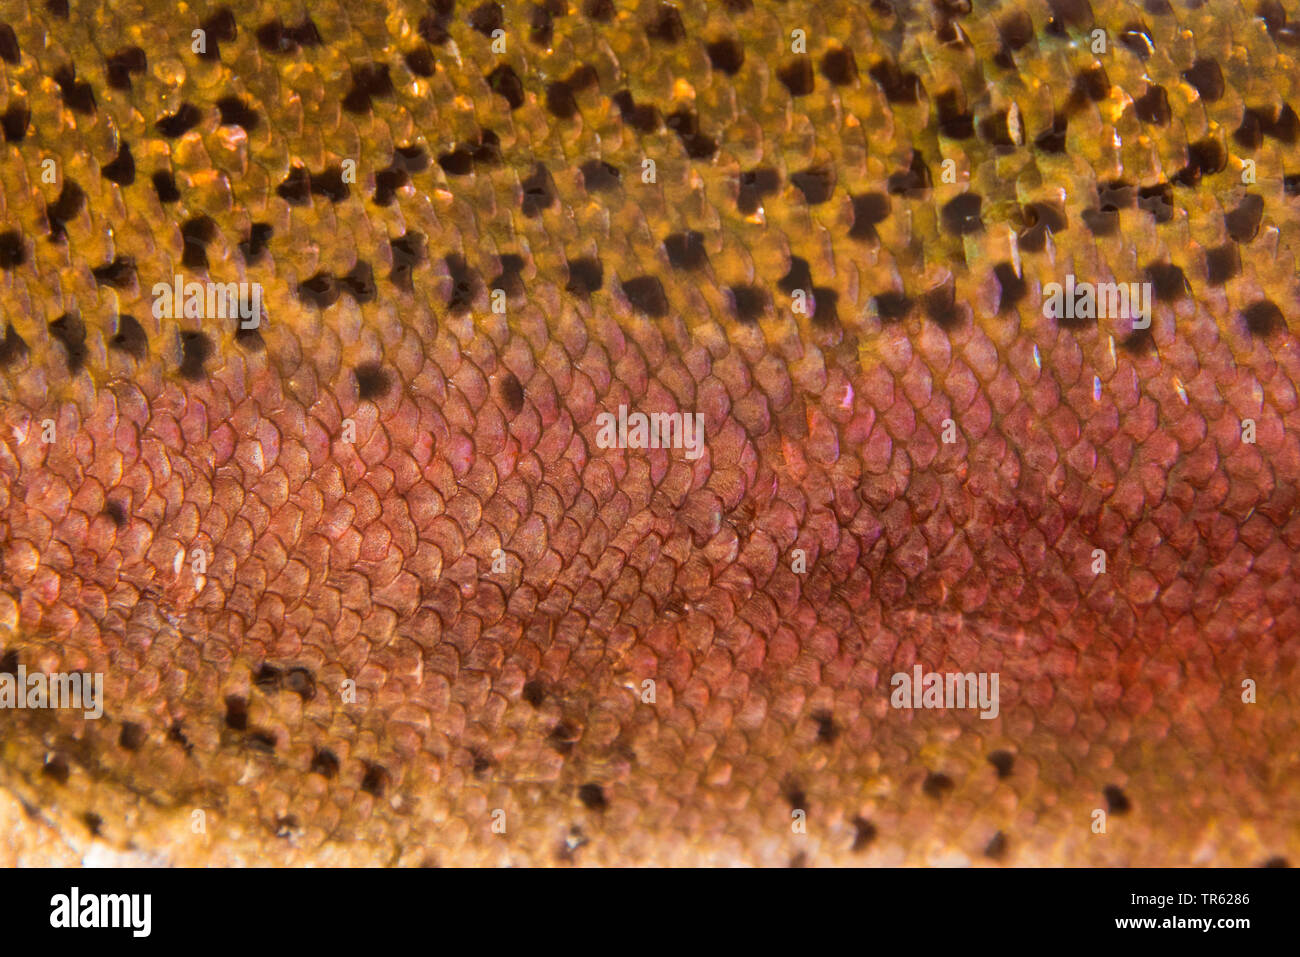 rainbow trout (Oncorhynchus mykiss, Salmo gairdneri), detail of scales and coloration, Germany Stock Photo